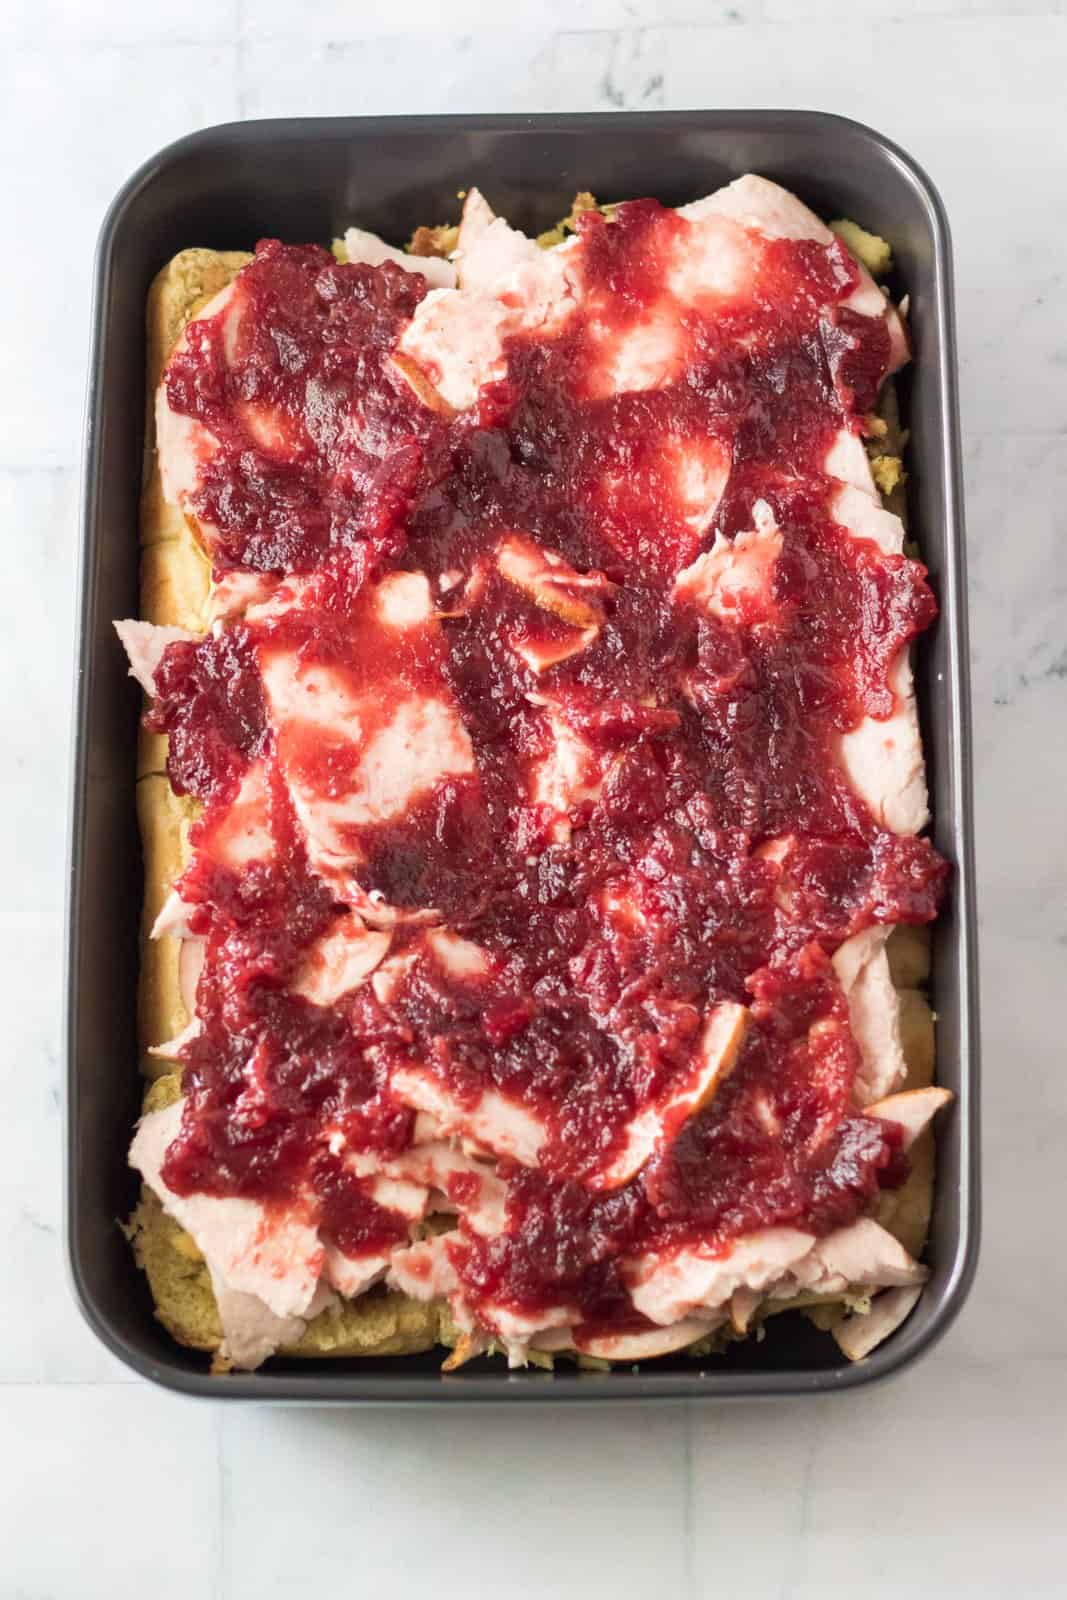 Cranberry sauce spread over the top of the turkey.